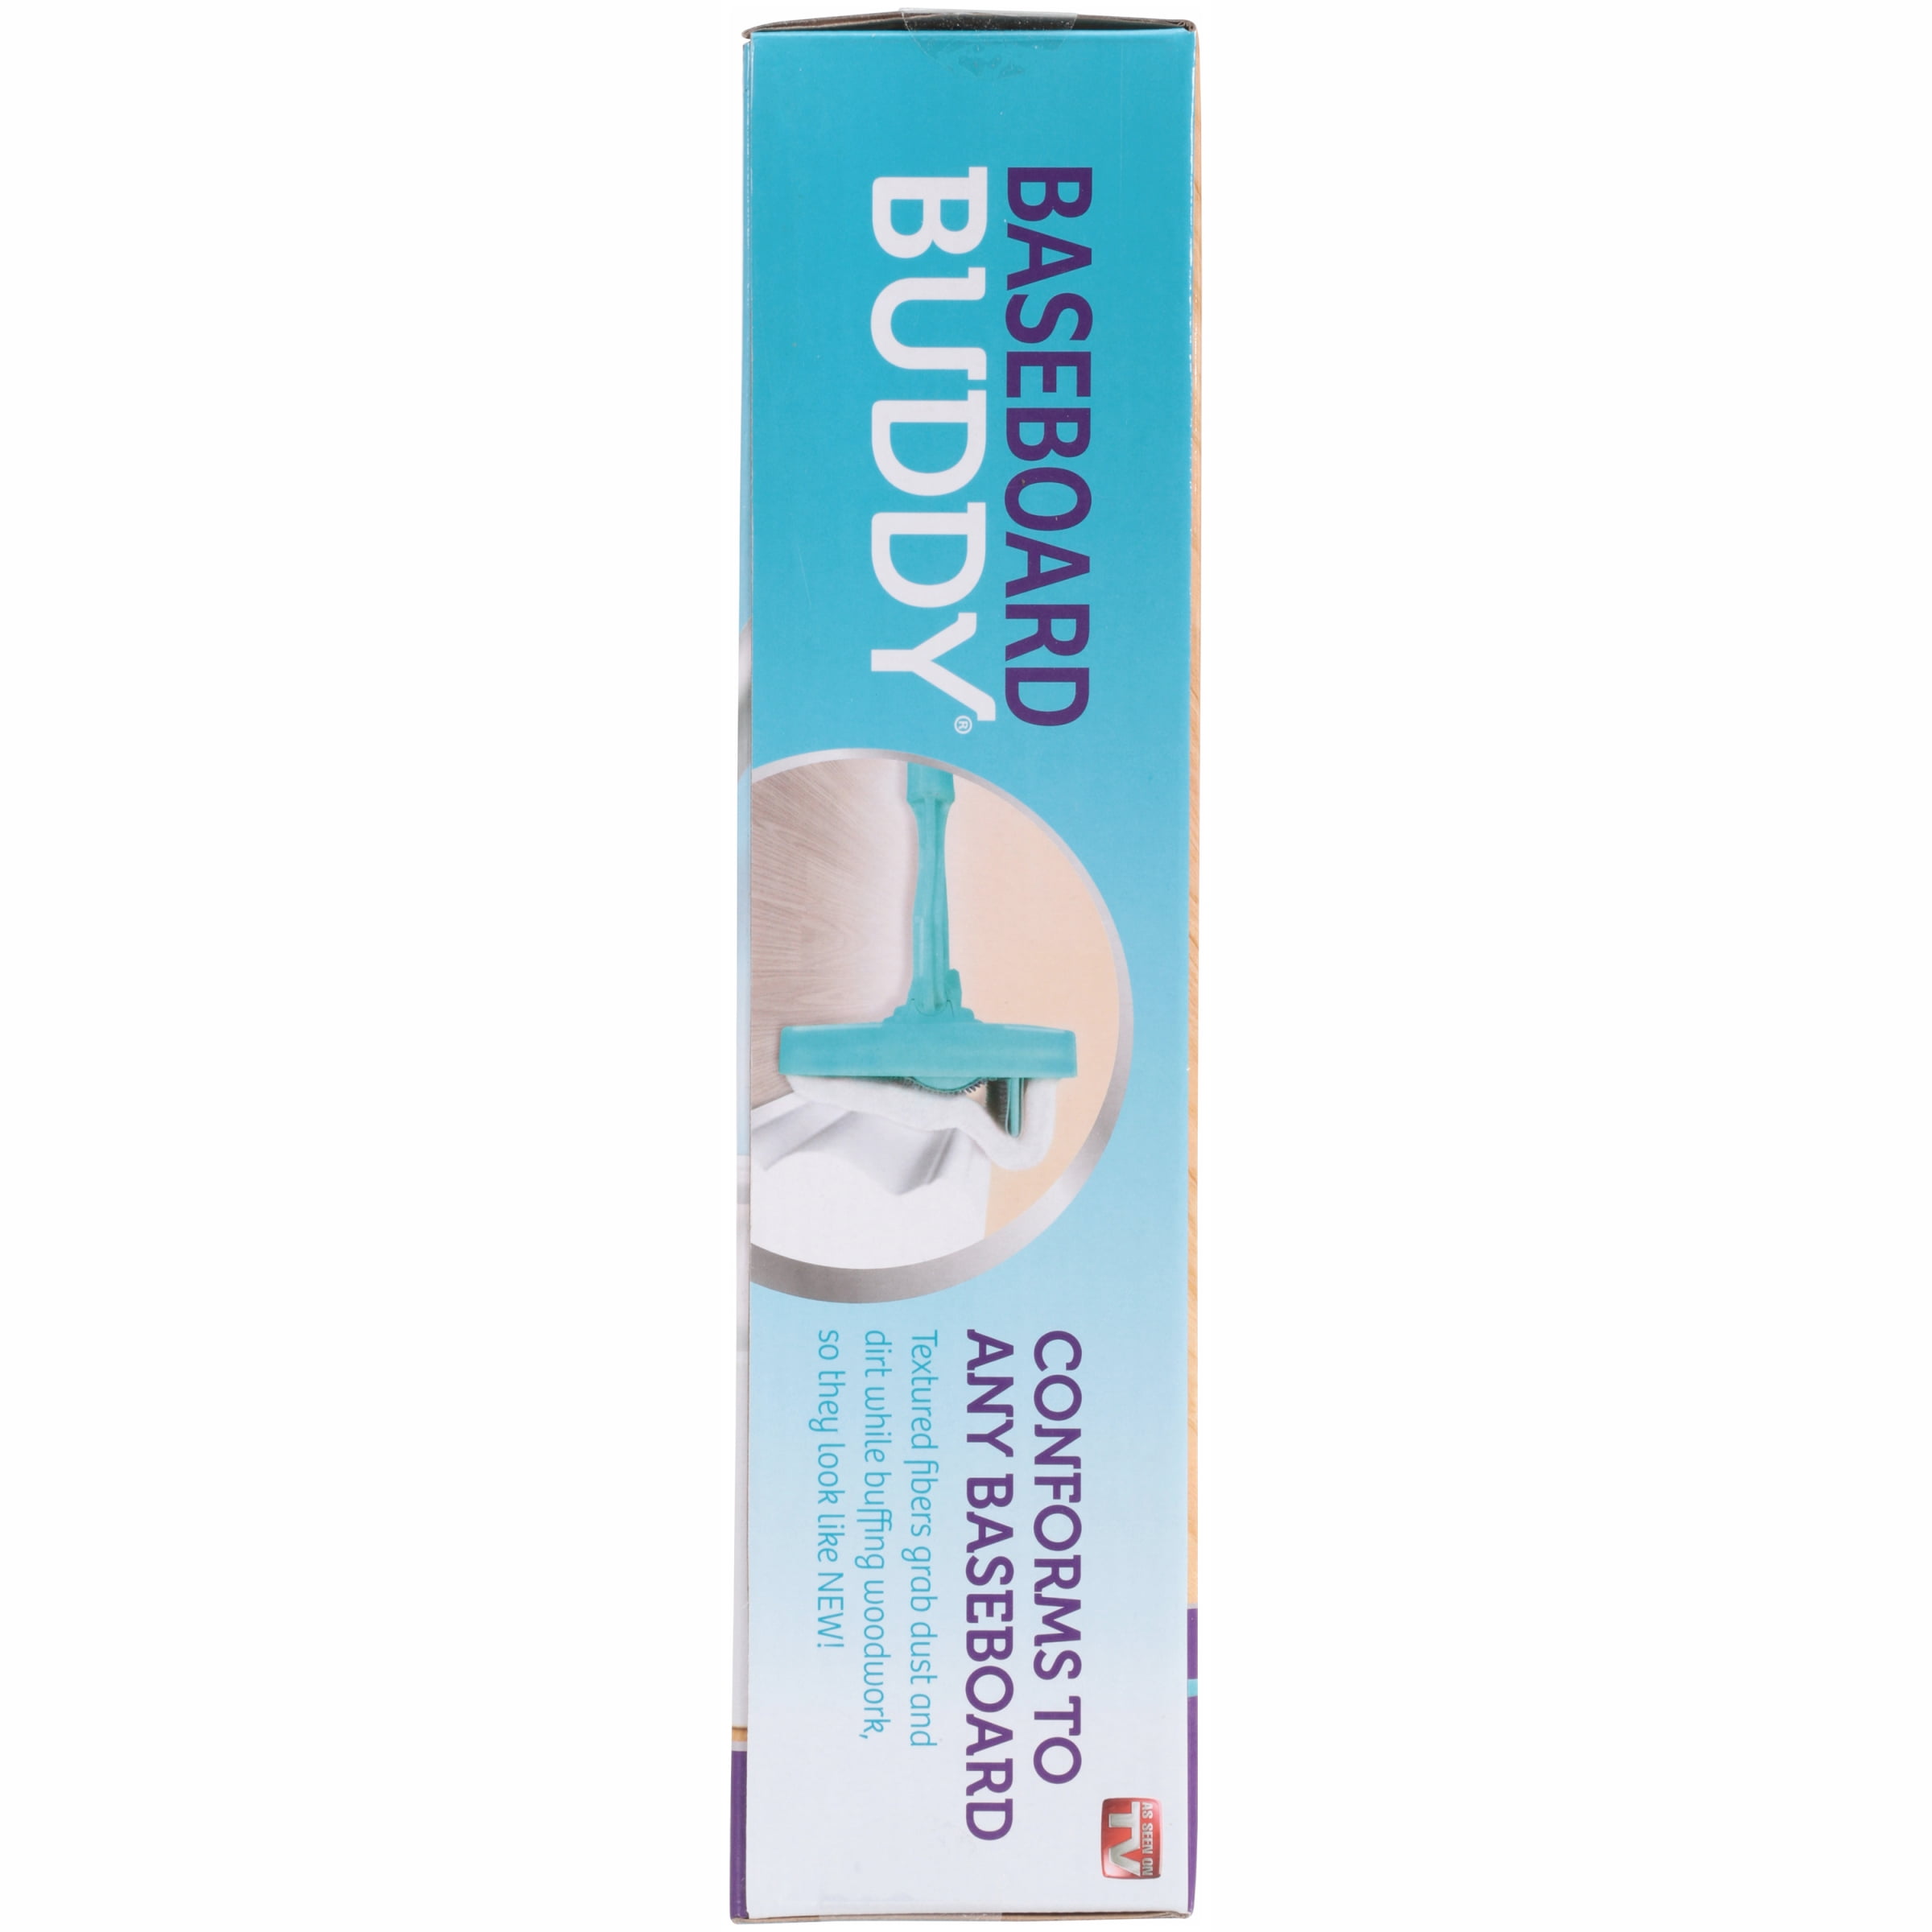 Baseboard Buddy As Seen on TV Clean Baseboards & Moldings New in damaged box